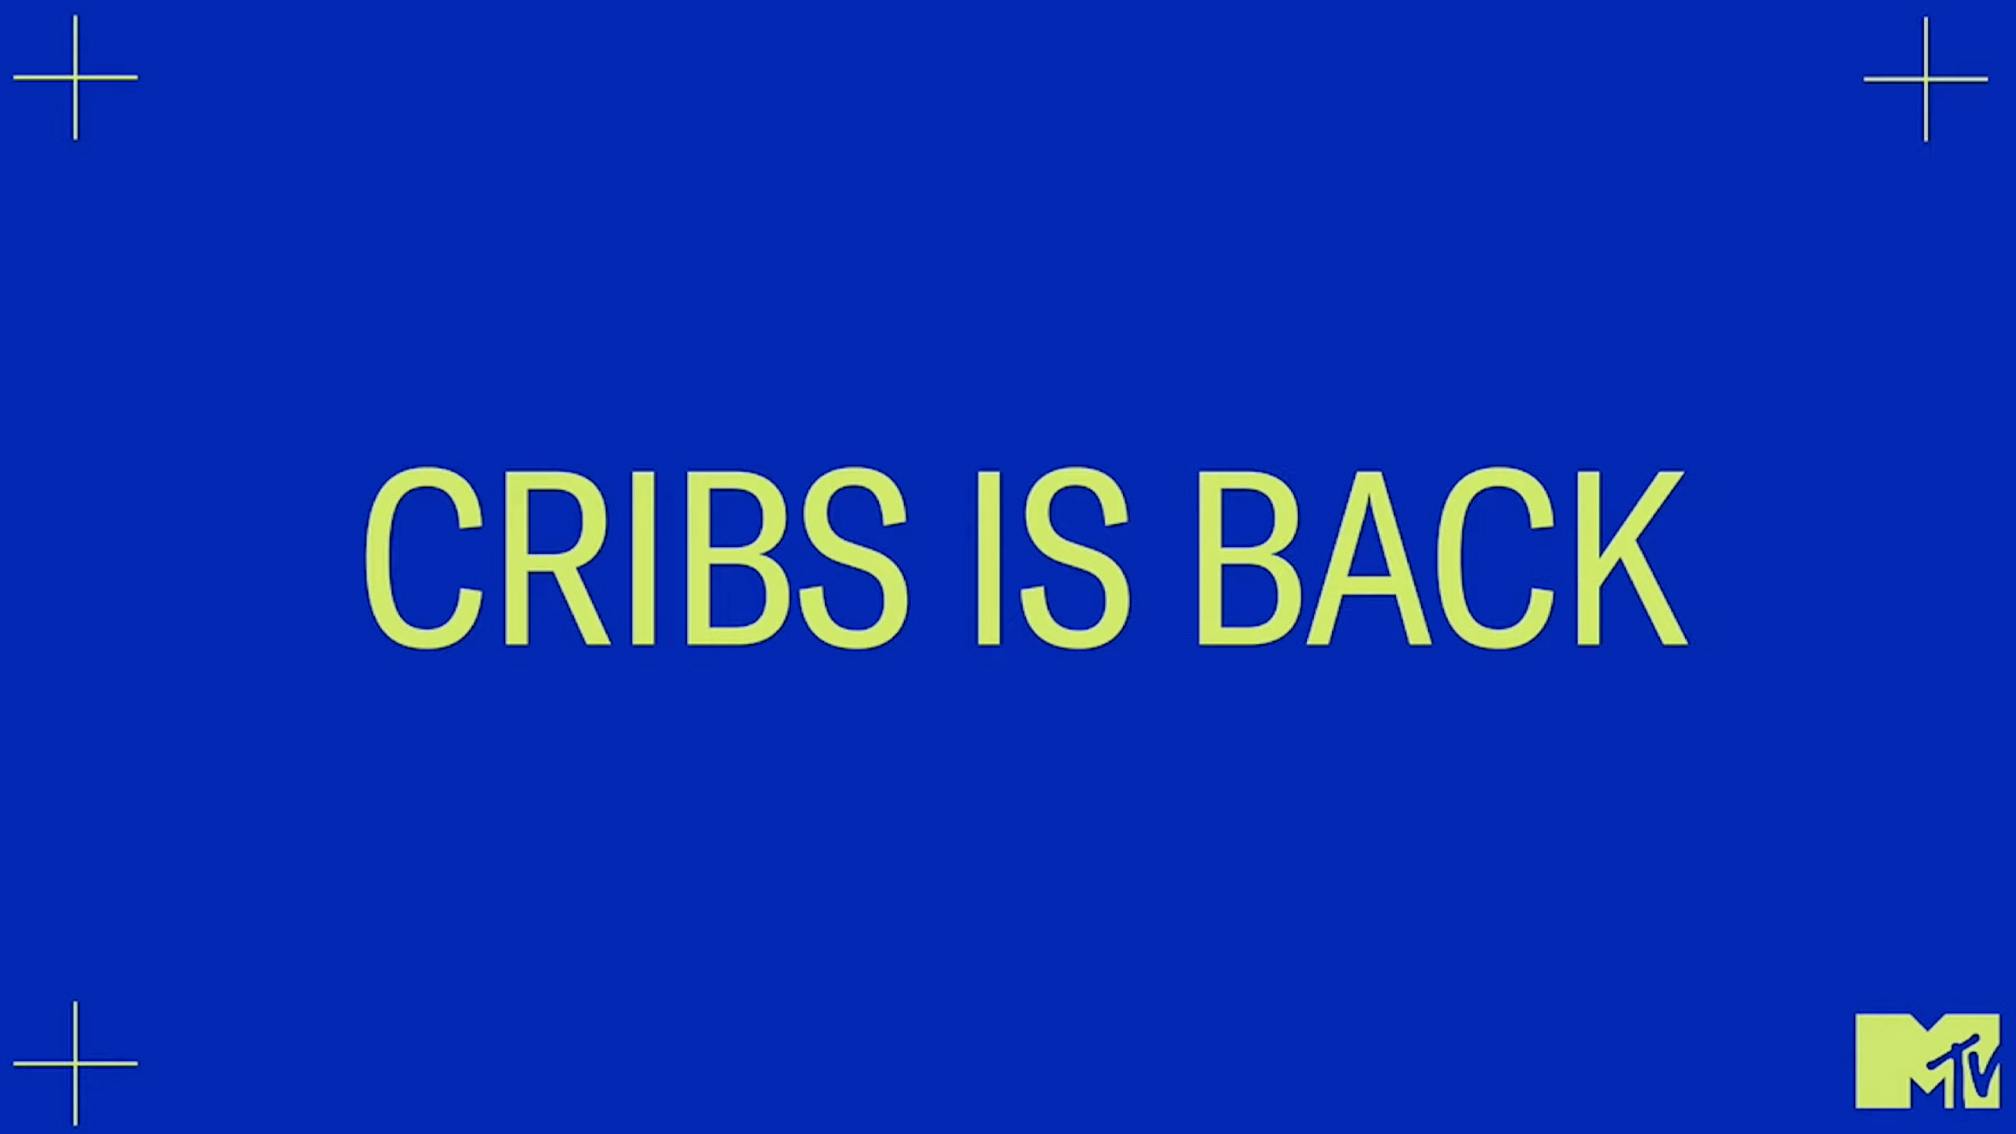 MTV Cribs is back and making its "epic return" next month